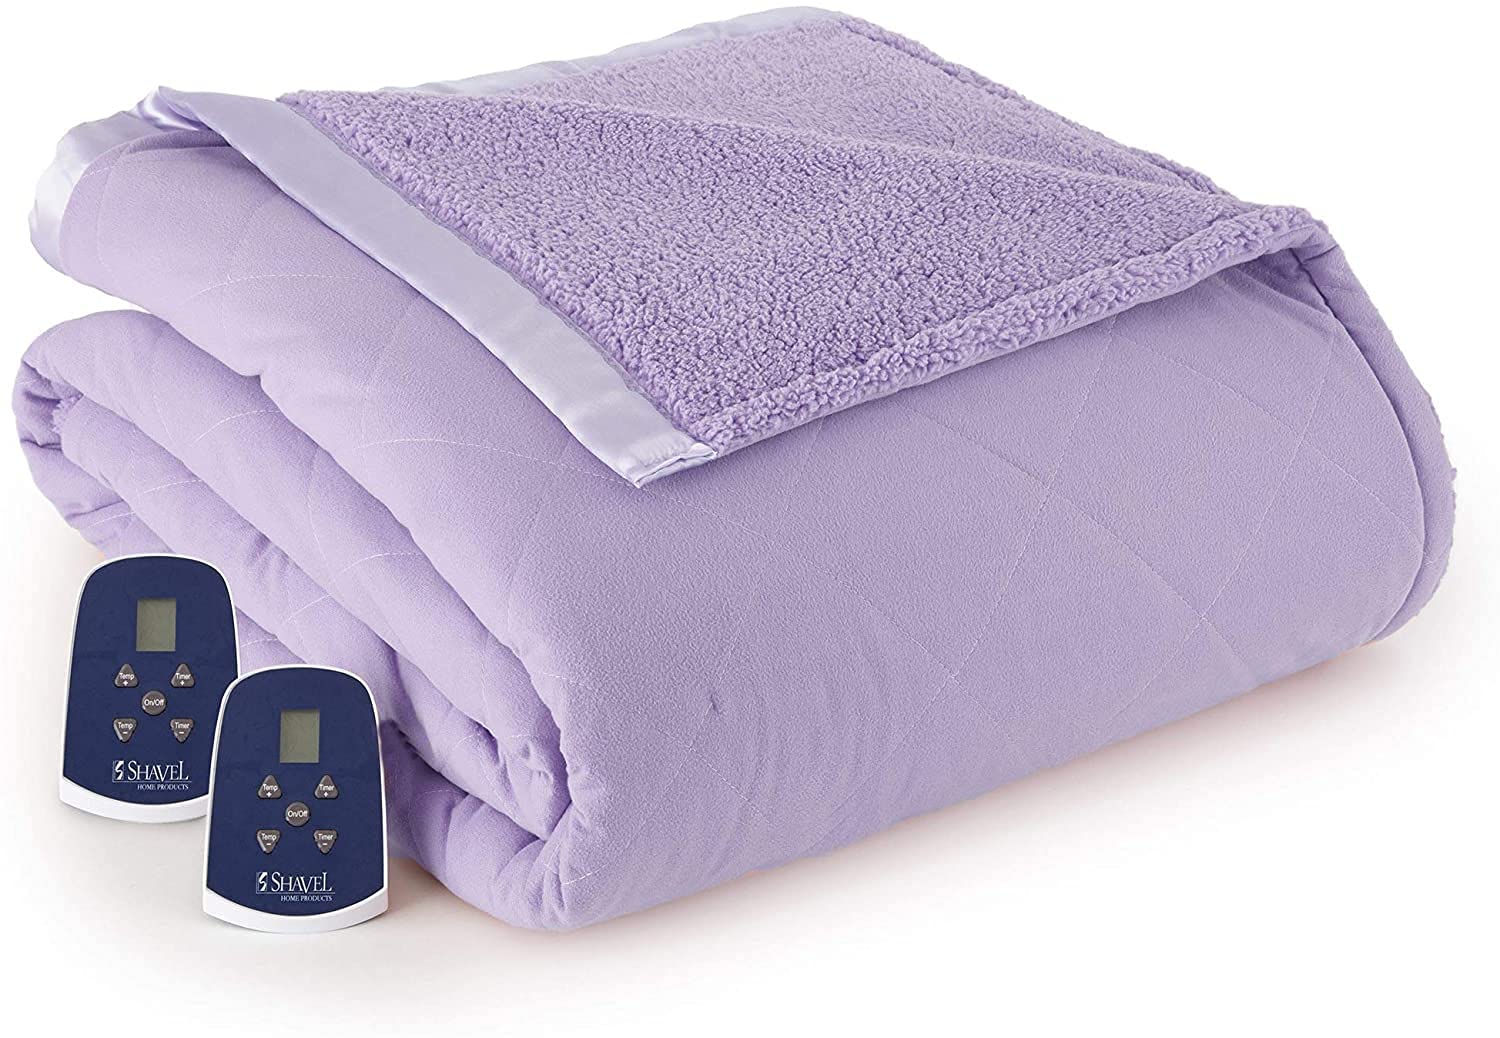 Shavel Home Products Quilted Micro Flannel and Sherpa 6-Layer Heated Electric Blanket, Amethyst, Queen